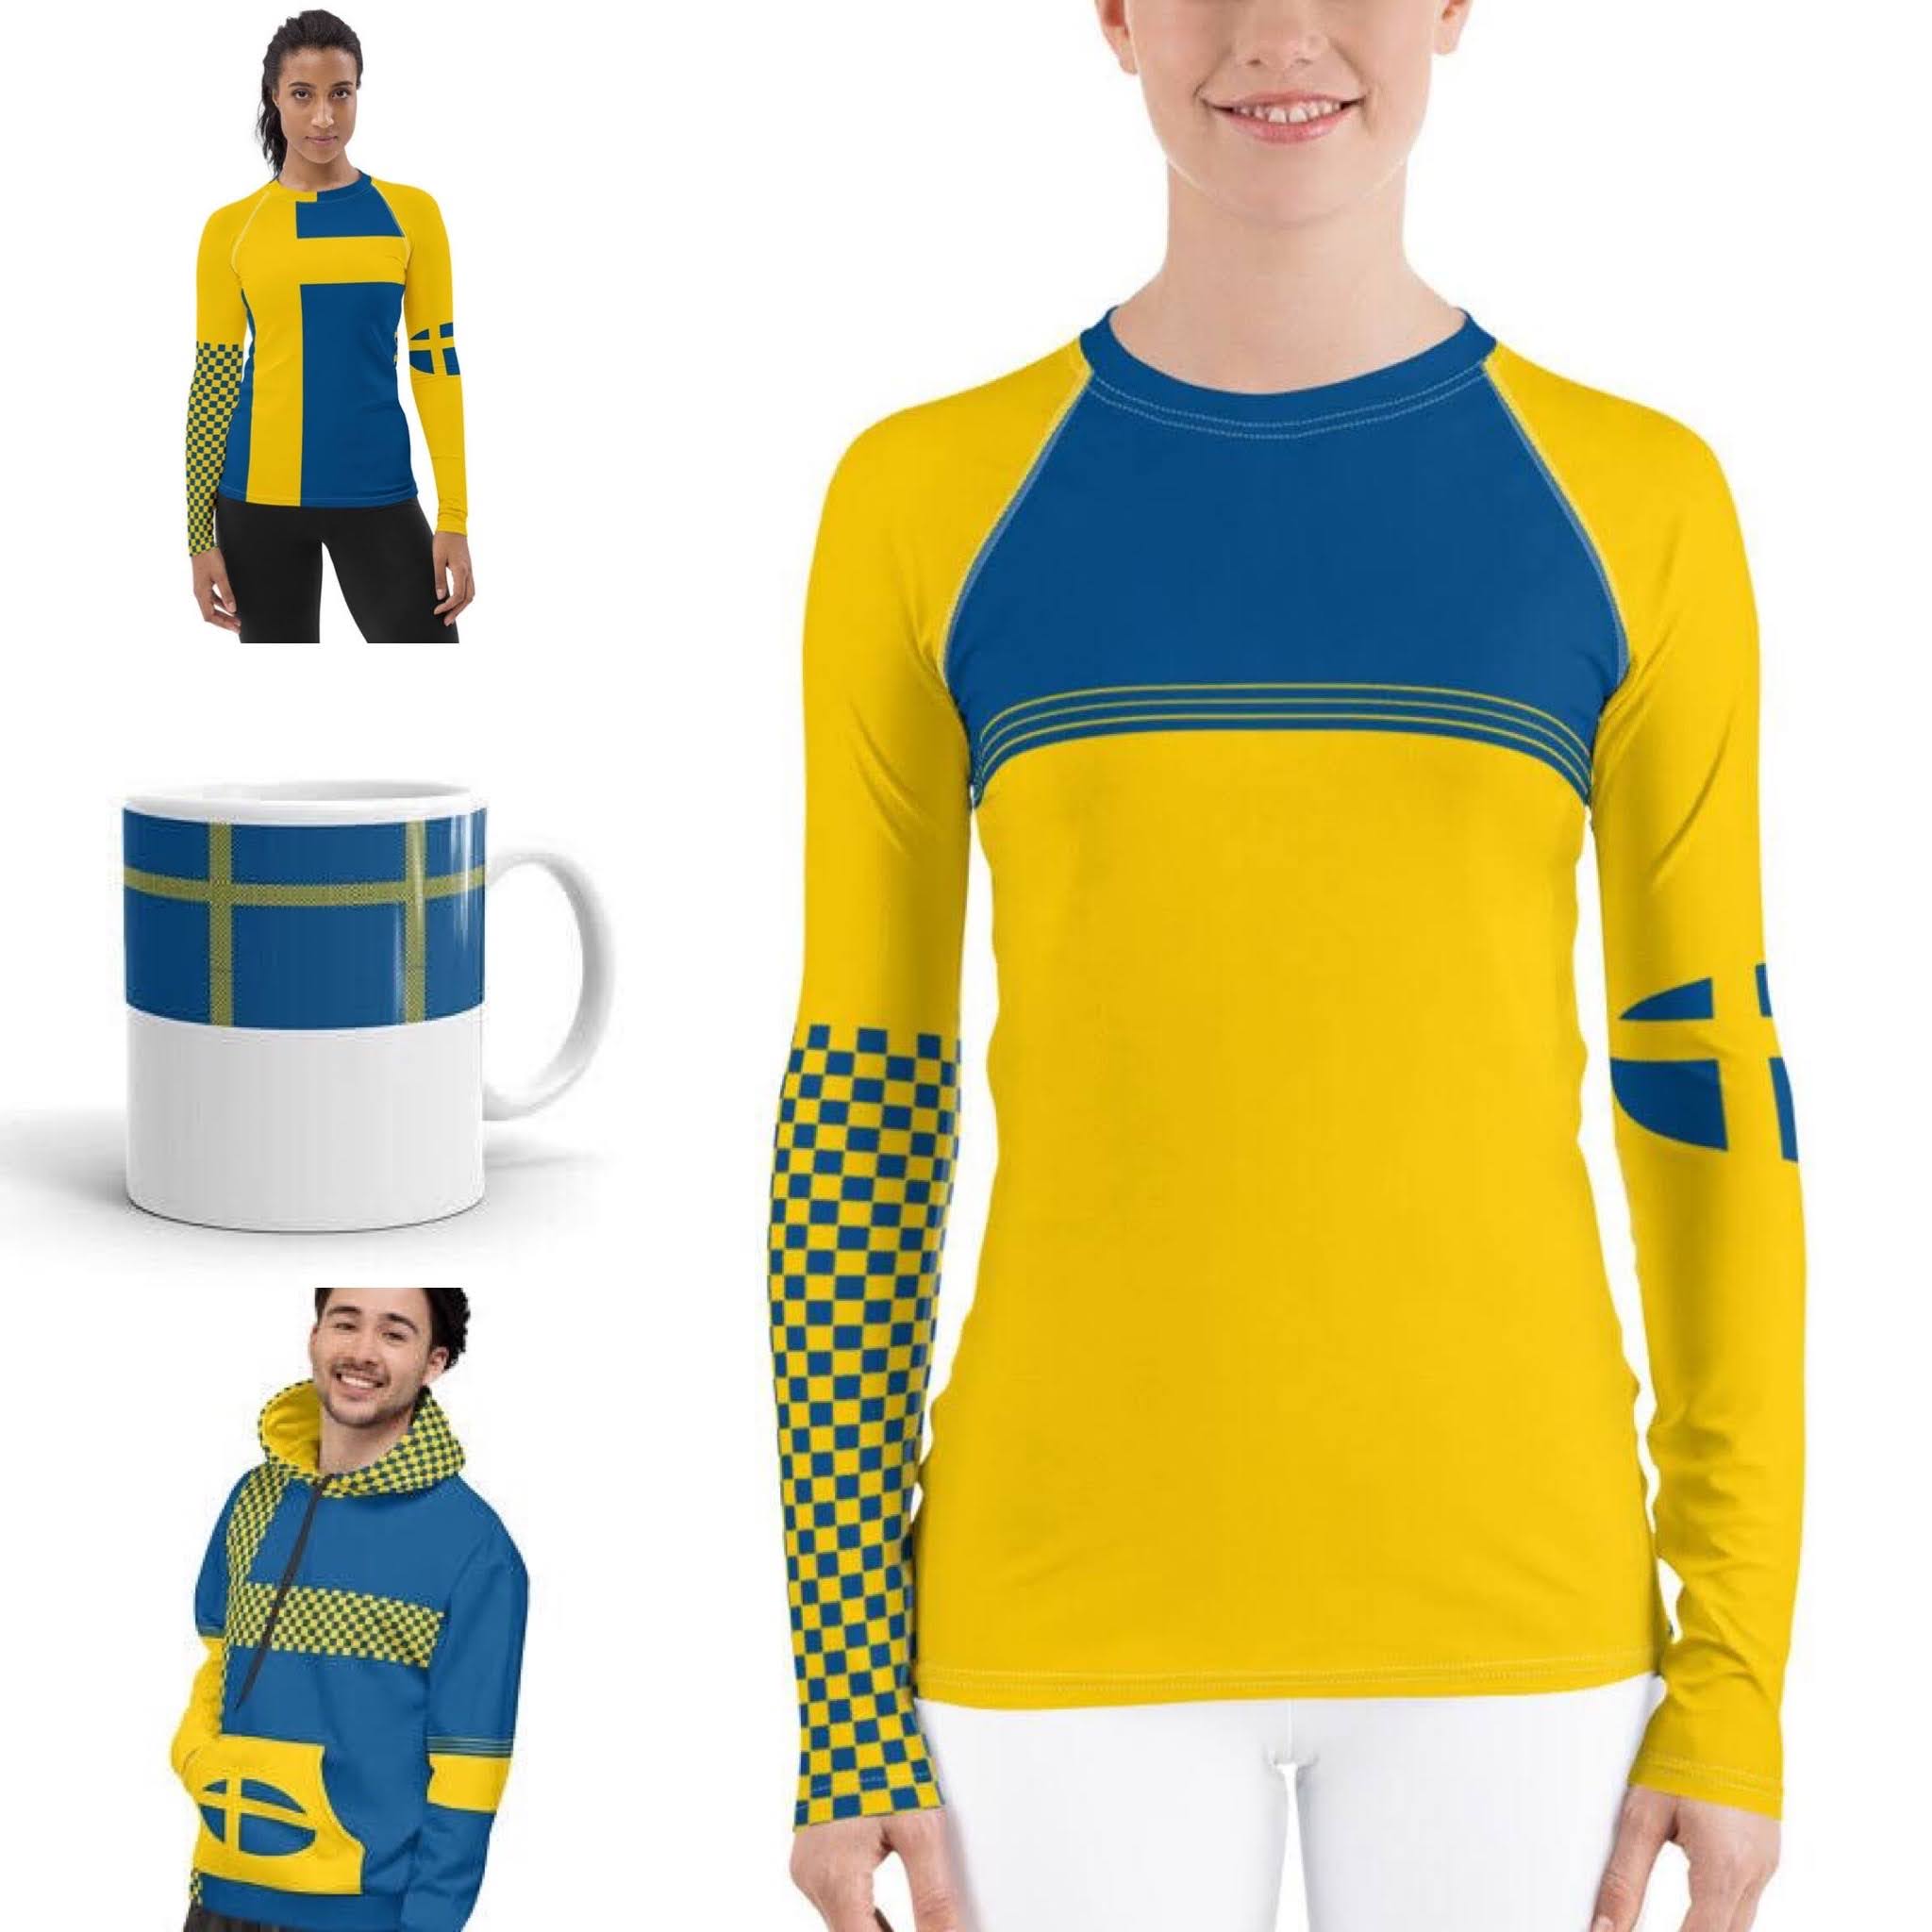 Shop The Swedish flag inspired blue and yellow volleyball gift and apparel collection available now on Etsy.